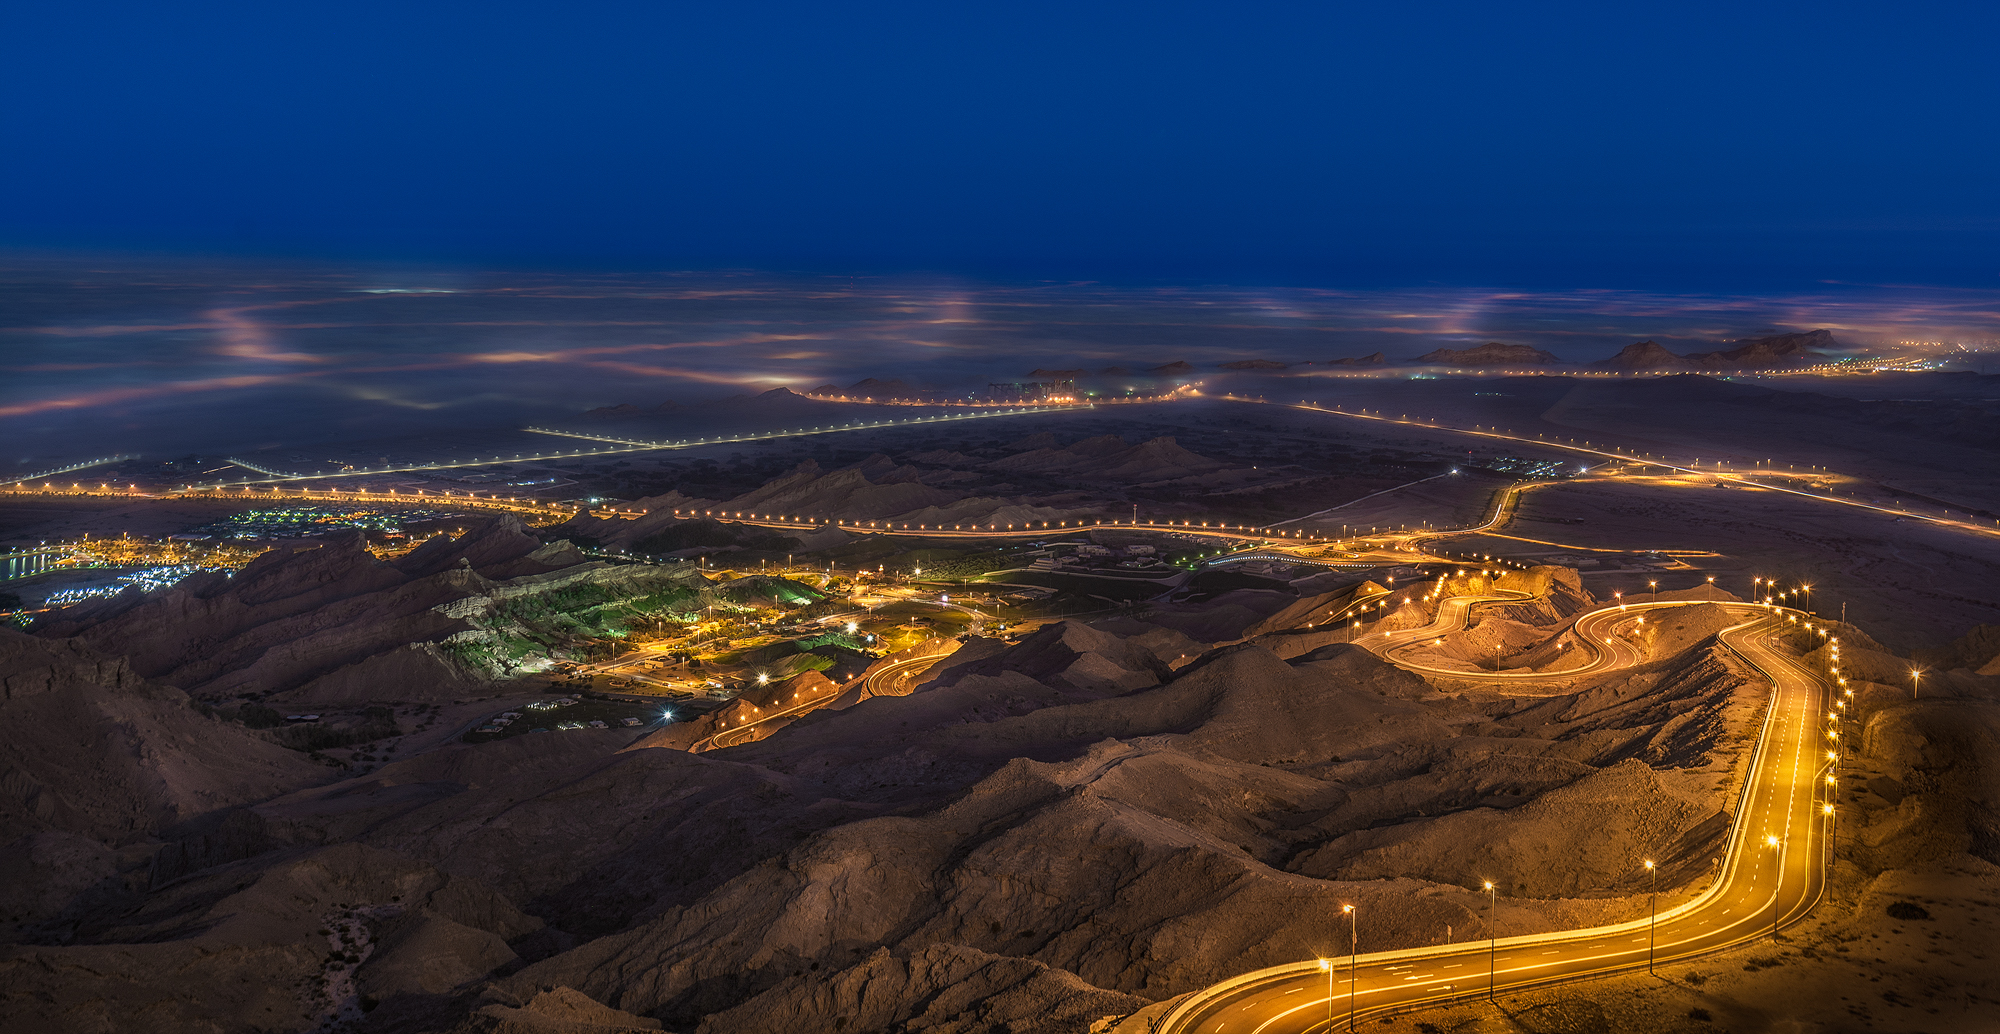 JEBEL HAFEET AT NIGHT by Gian Paolo De Leon